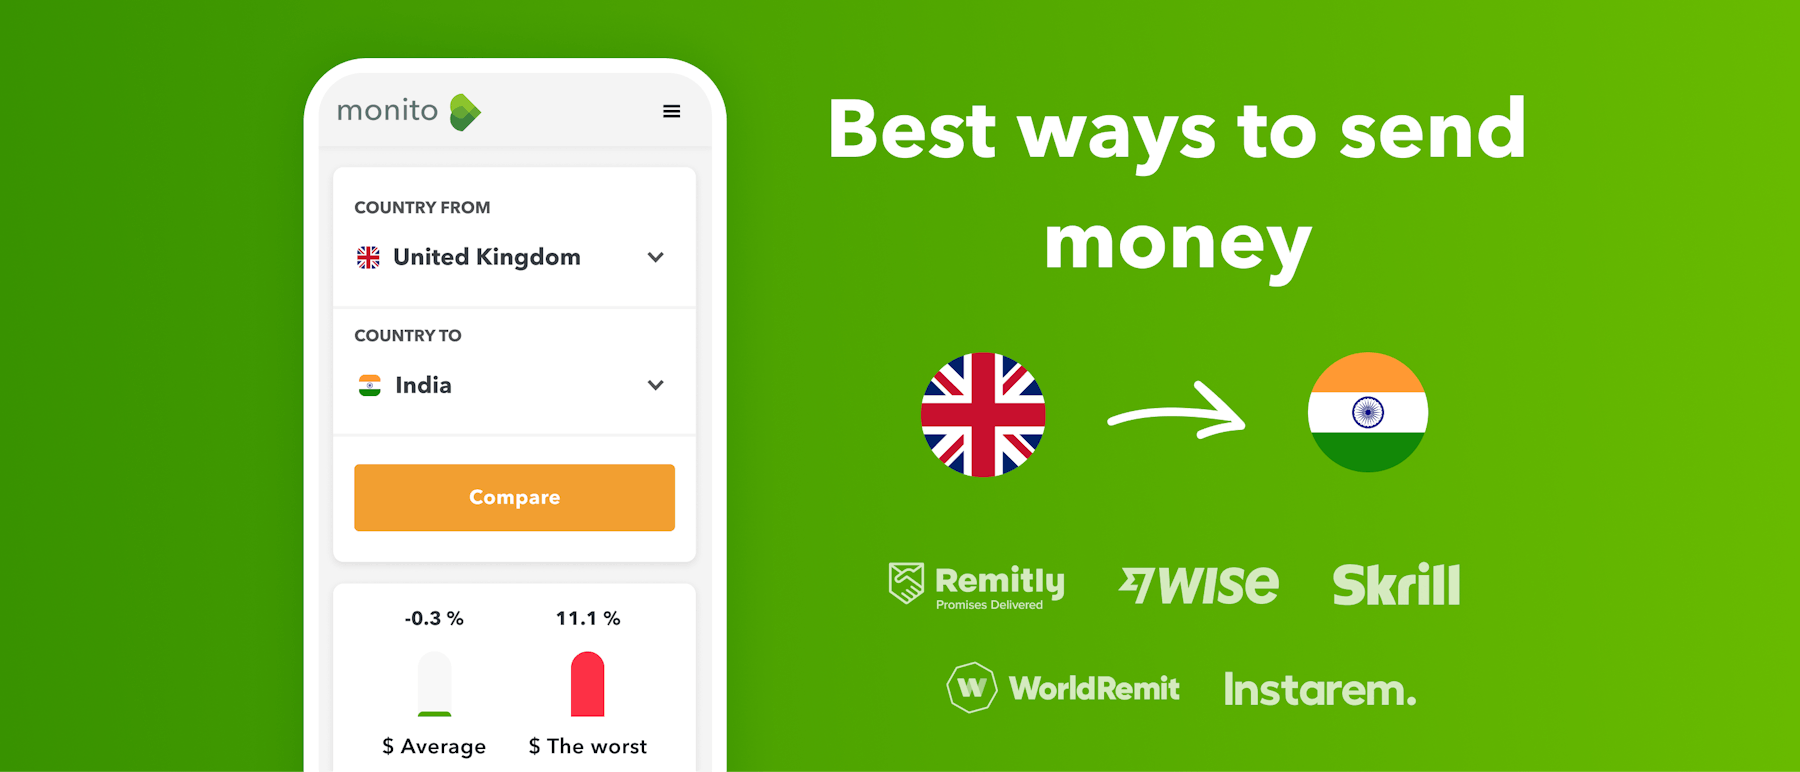 Best ways to send money to India from the UK compared on Monito.com